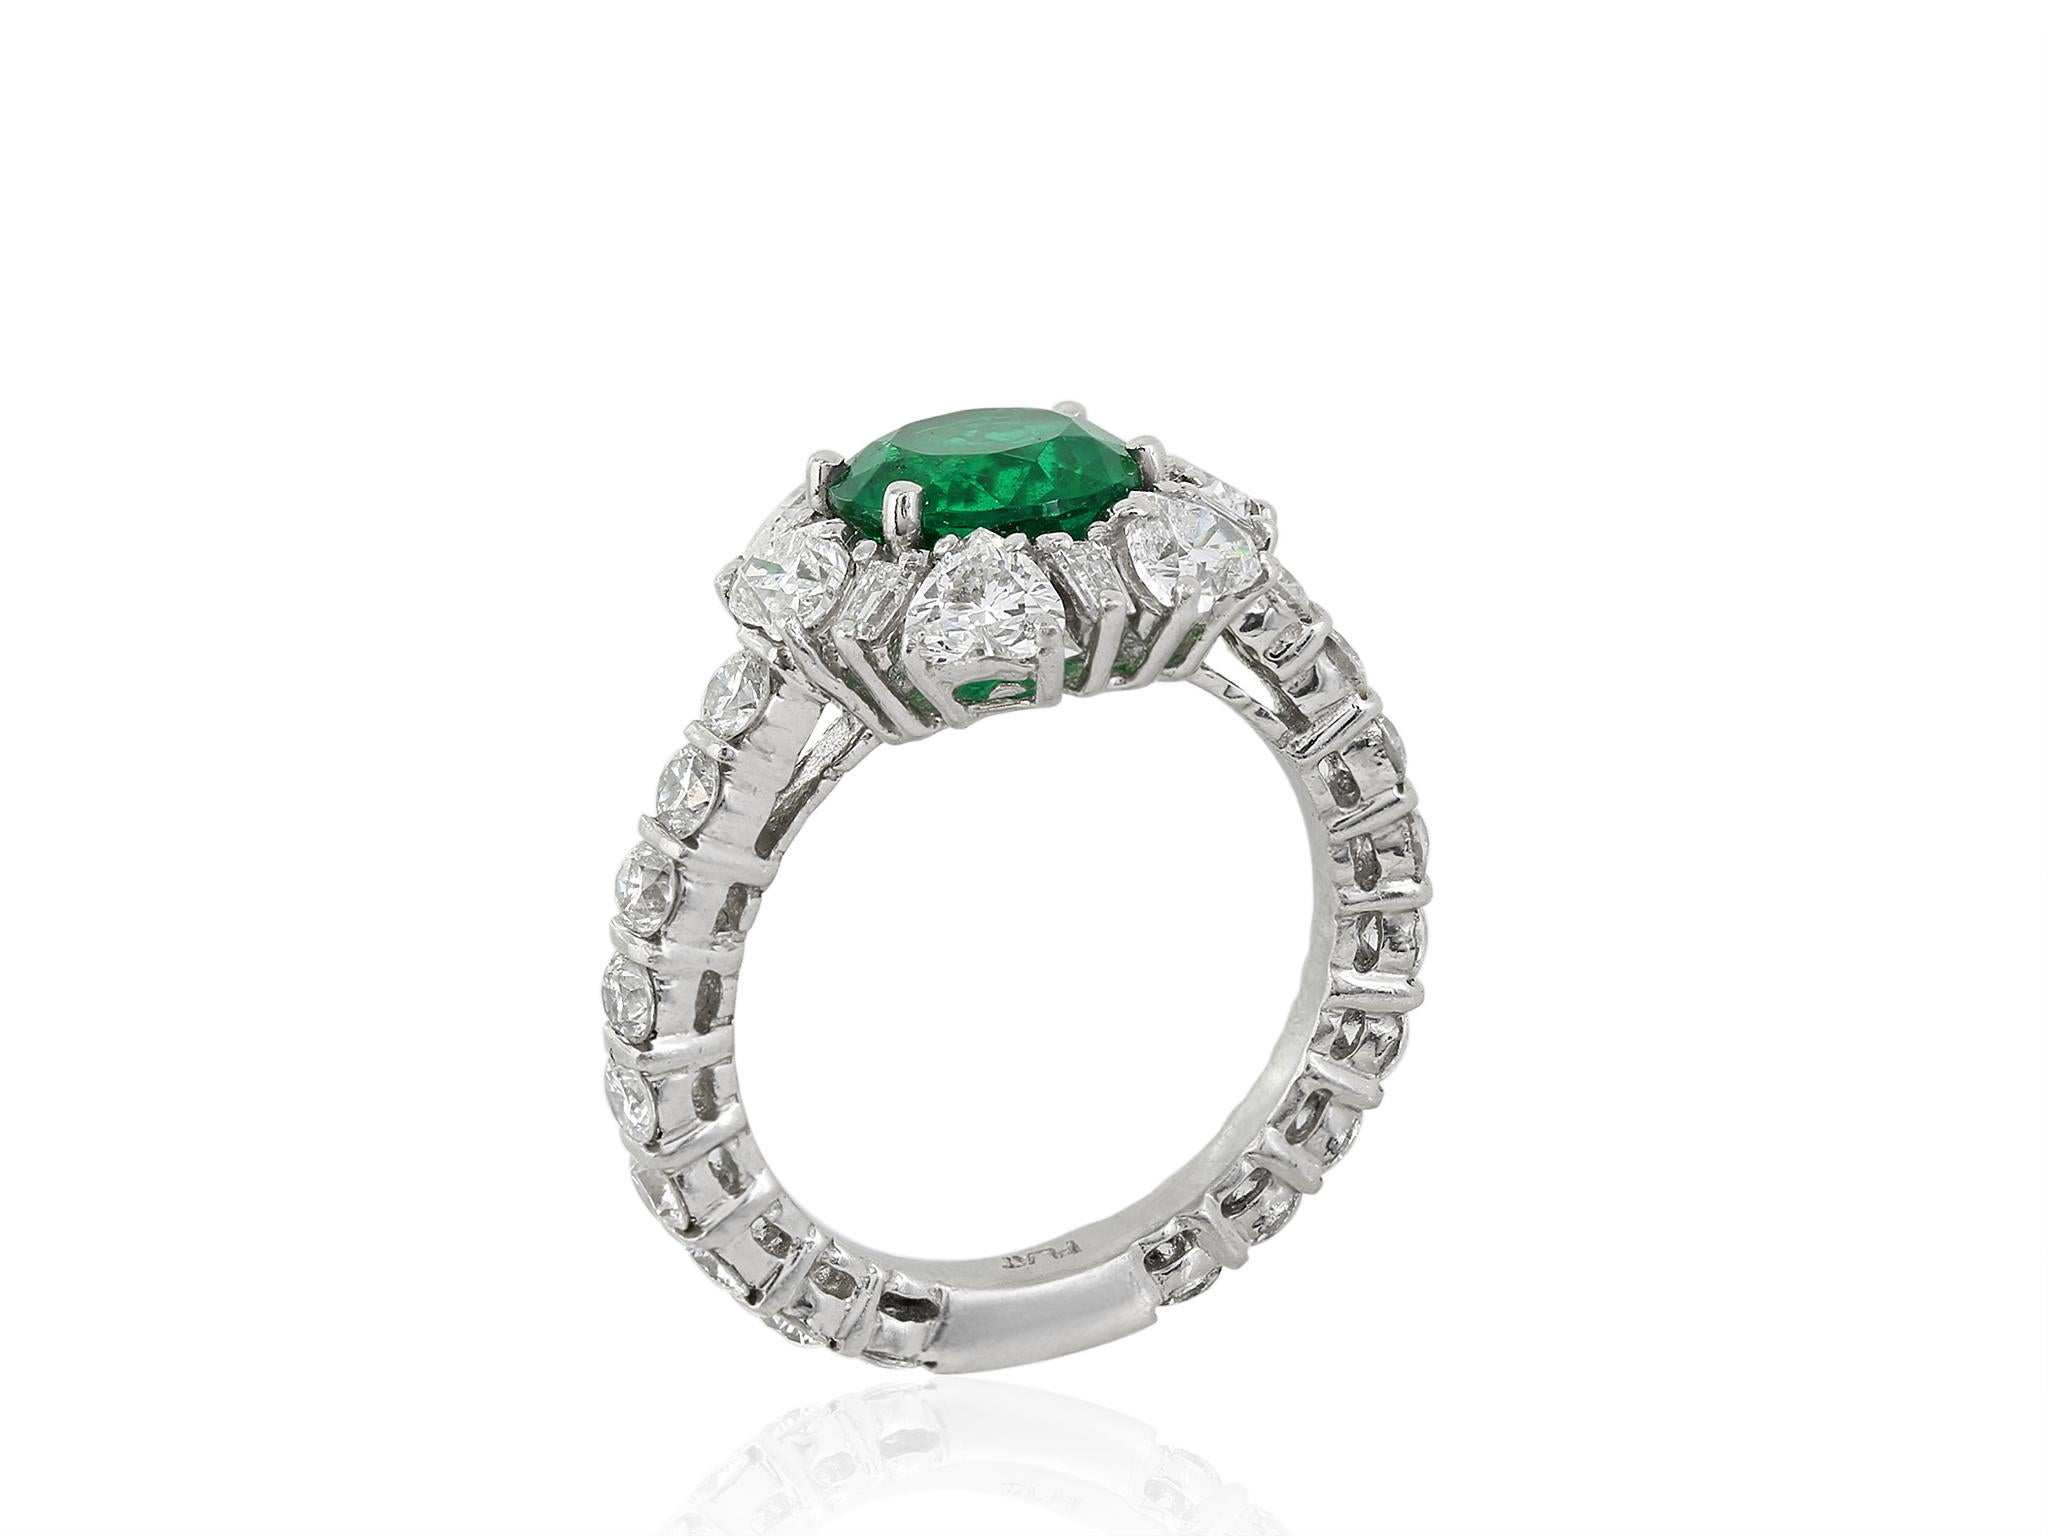 Platinum estate cluster ring consisting of 1 round brilliant cut Colombian emerald weighing 2.02 carats set with 2.86 carats total weight of round brilliant cut, heart shape and baguette diamonds.